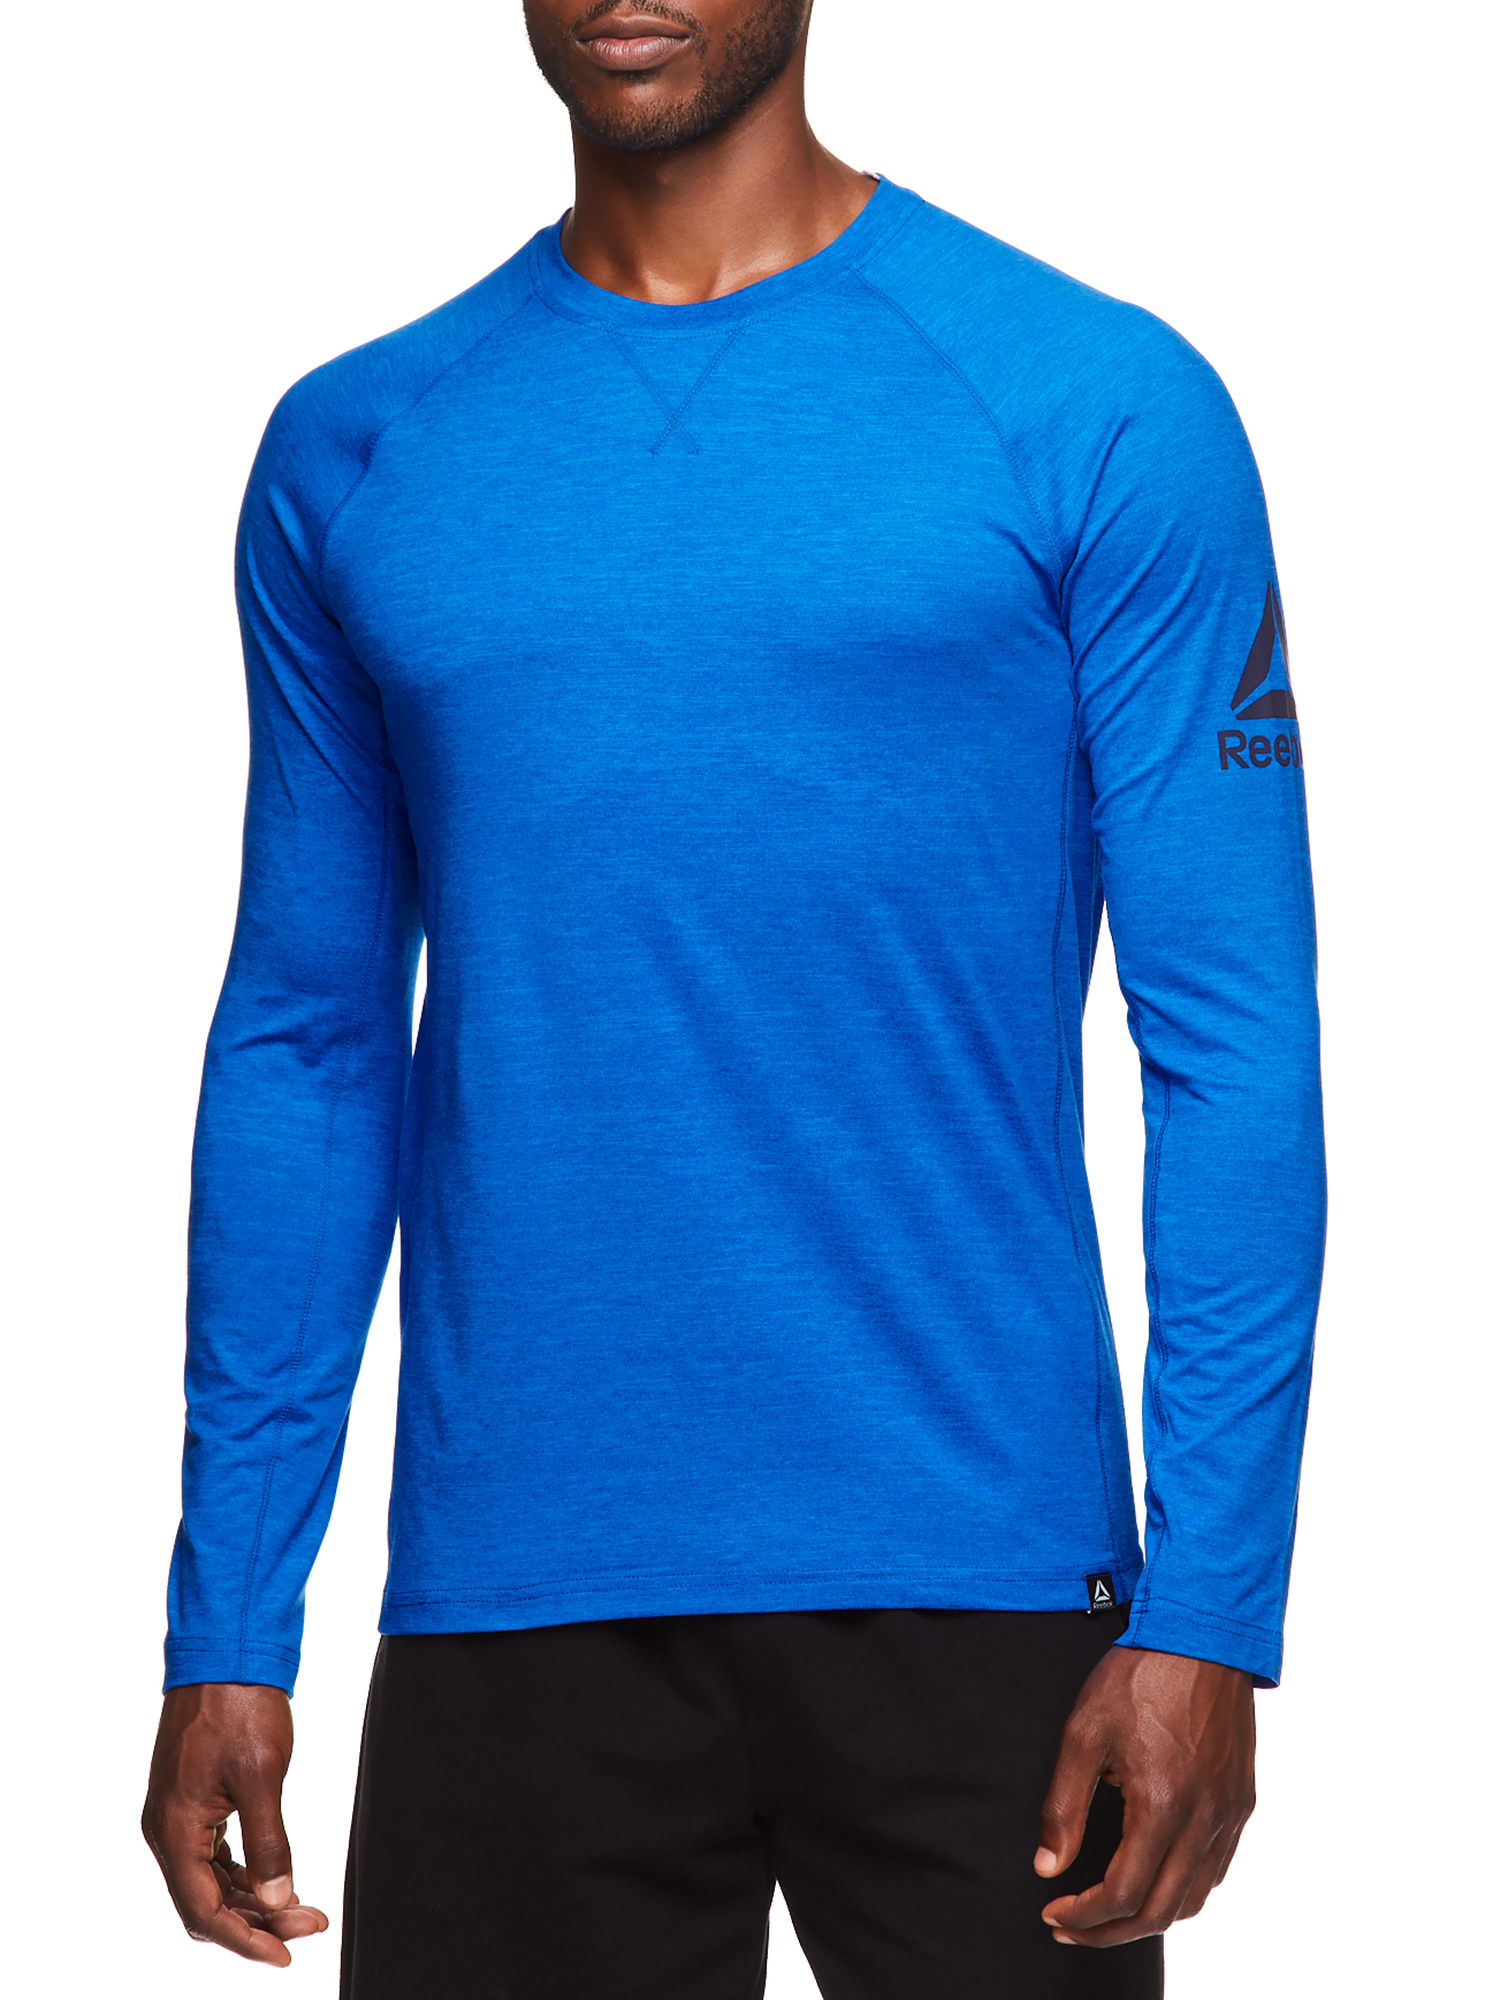 Reebok Men's and Big Men's Active Long Sleeve Warm-Up Training Crew, up to Size 3XL - image 1 of 4